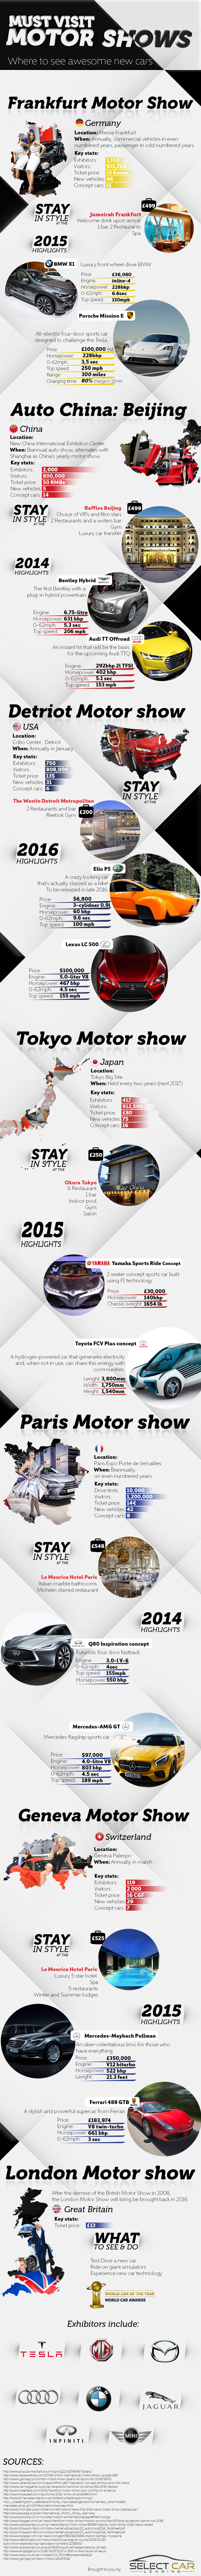 Must Visit Motor Shows Around the World - Car Infographic